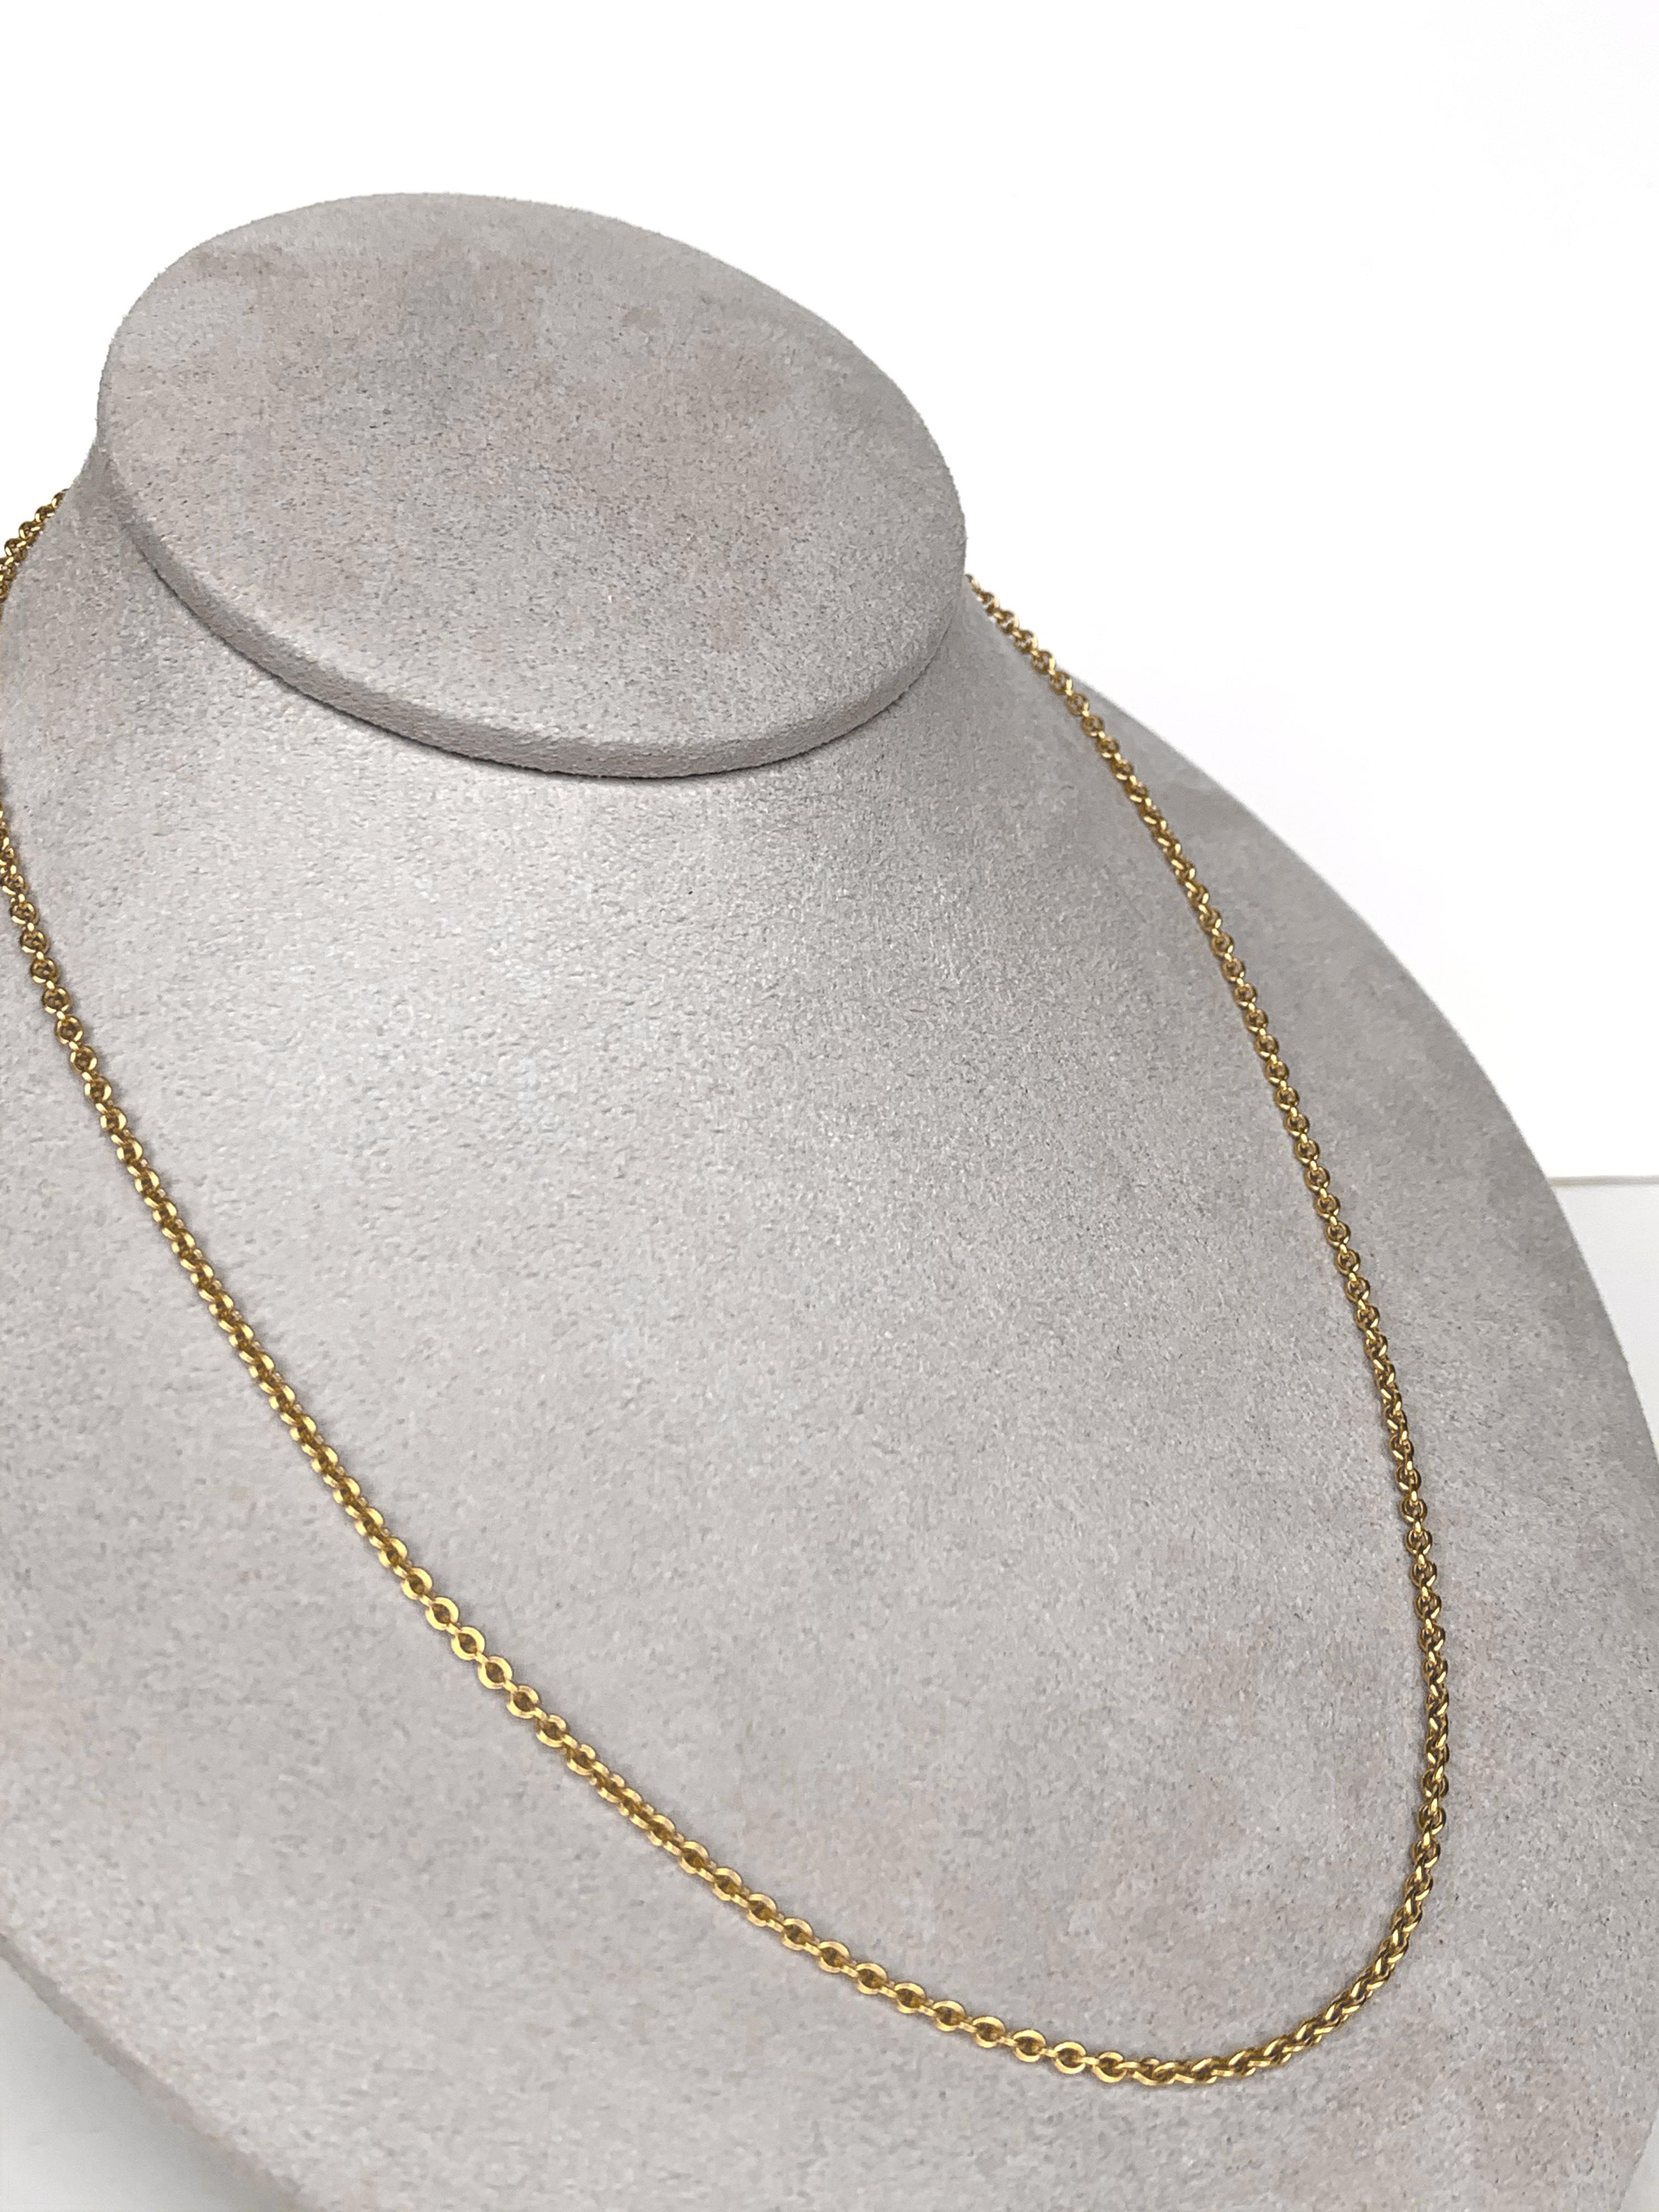 Thin chainmail in 22 karat gold with s-hook closure. Can either be worn alone, or layered with other chains and pendants. Entirely handmade by artist in New York City. 